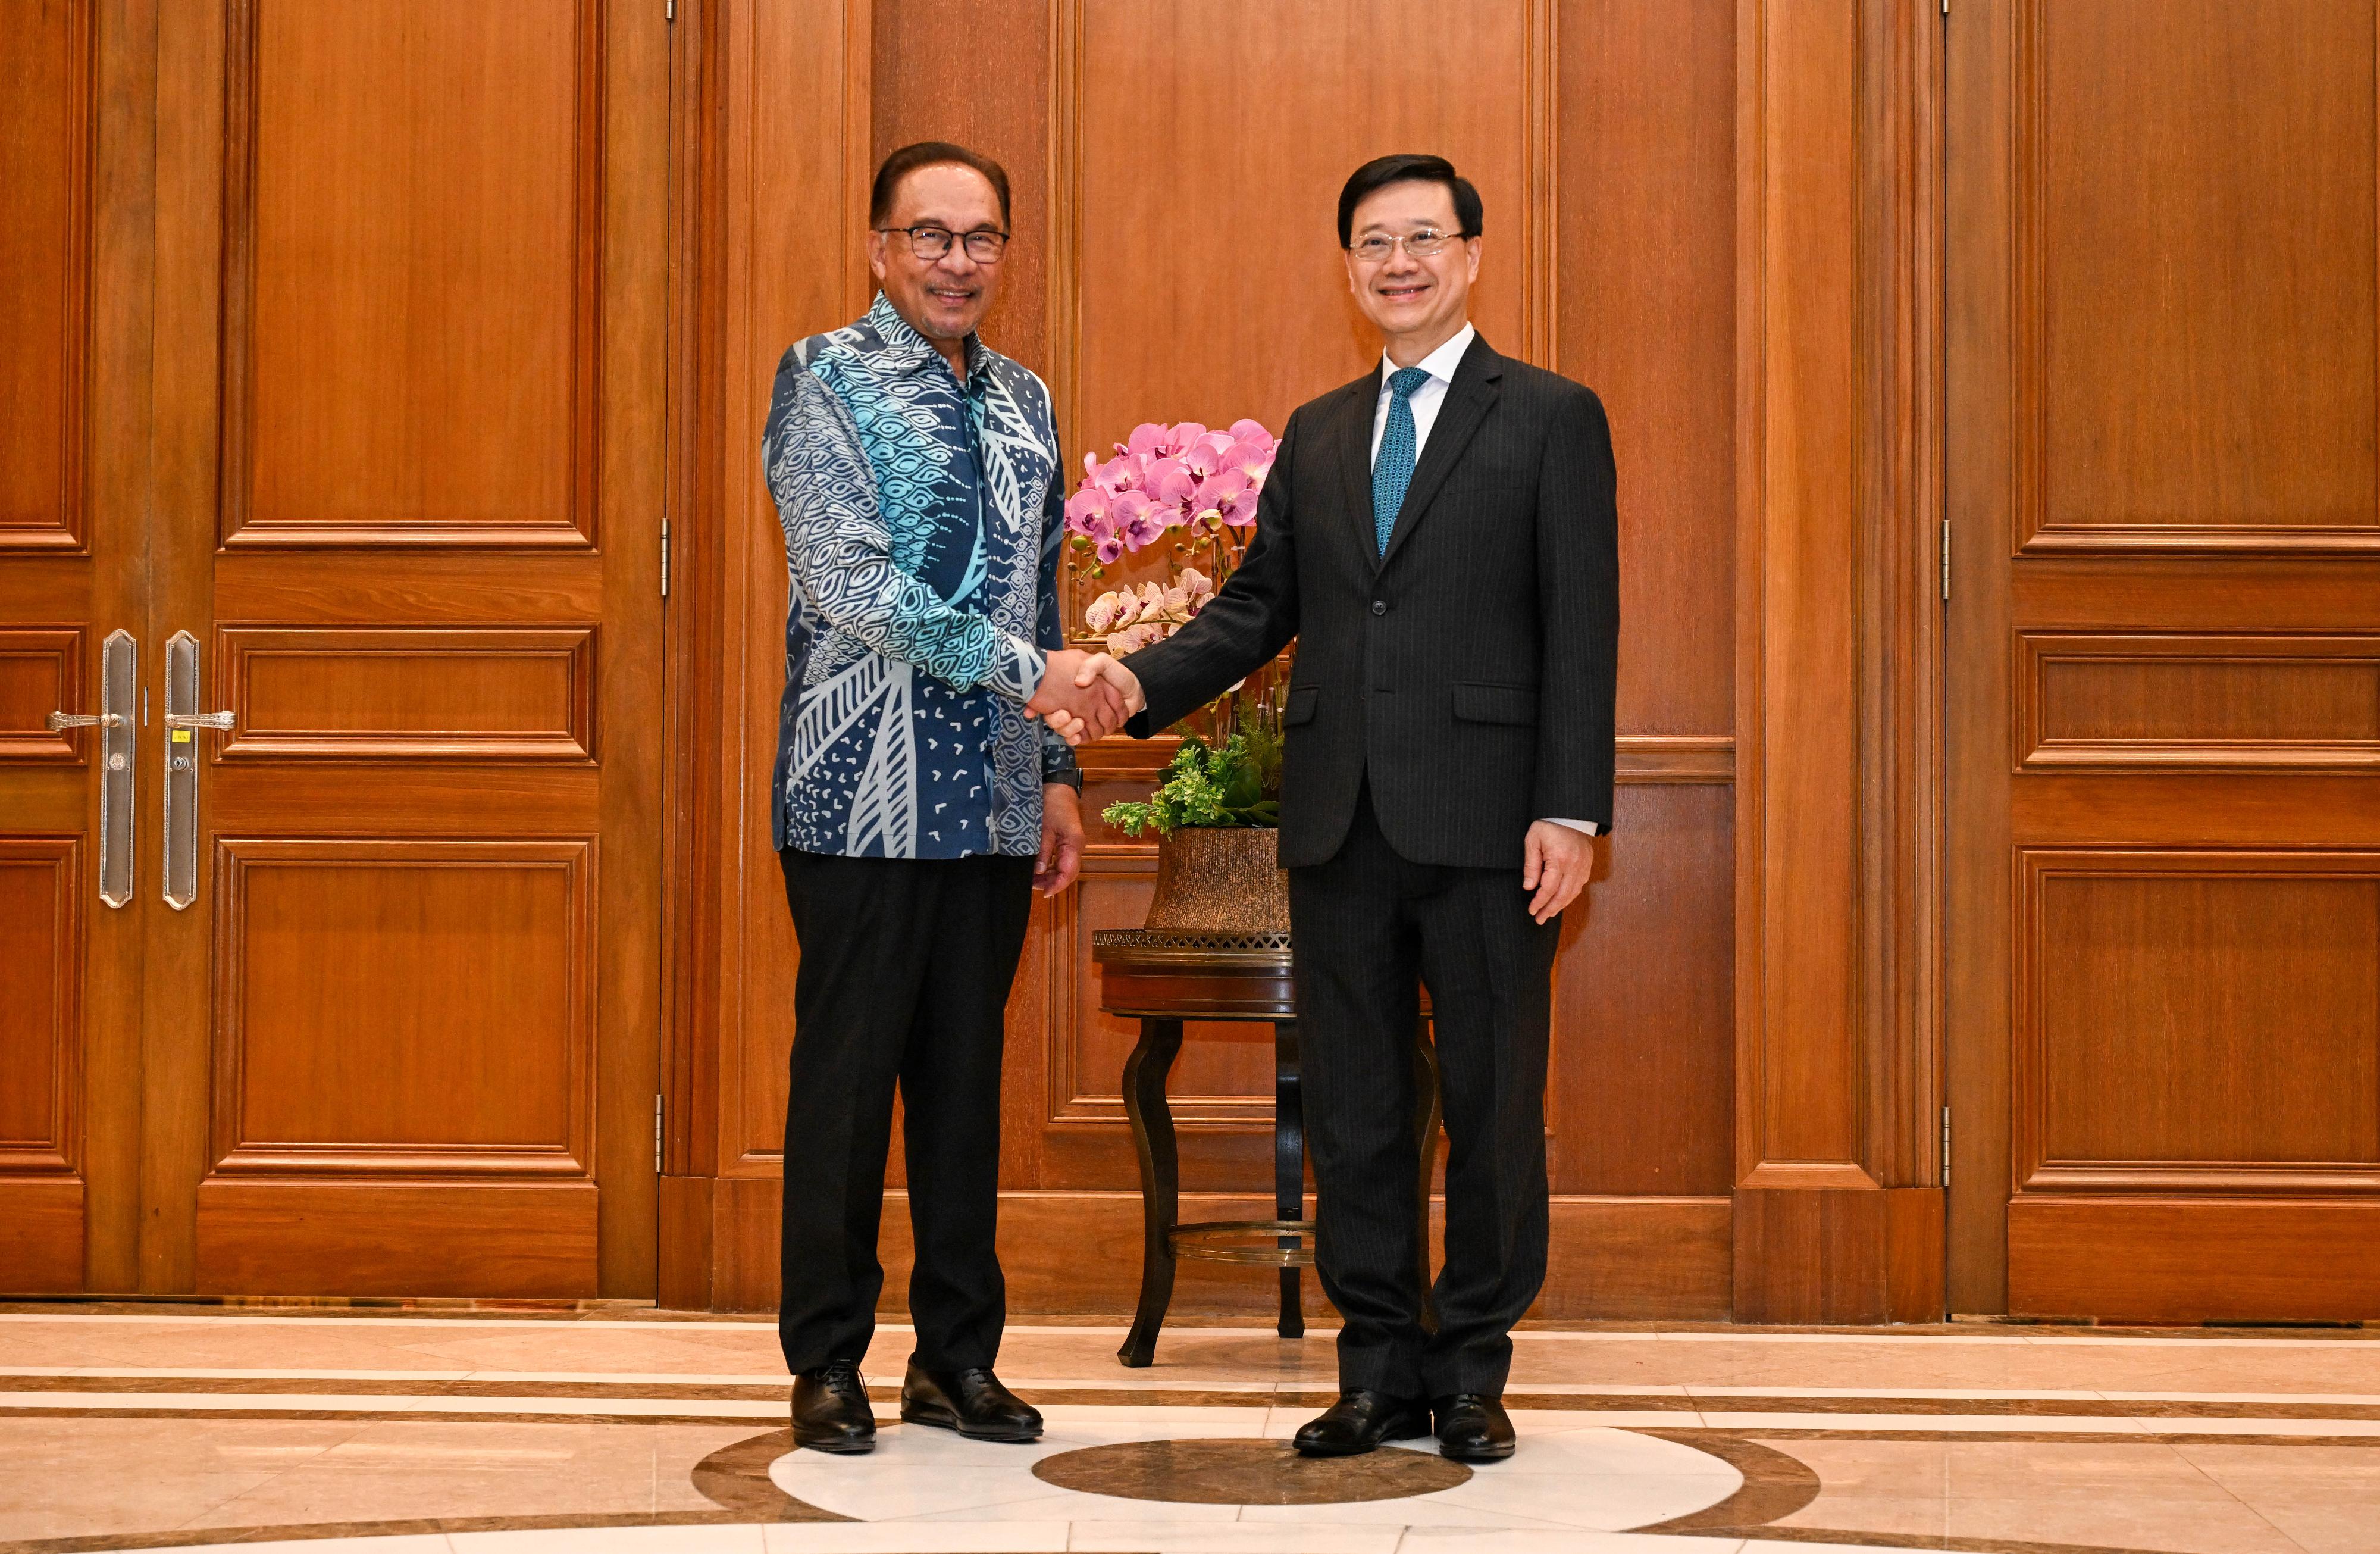 The Chief Executive, Mr John Lee (right), meets with the Prime Minister of Malaysia, Dato' Seri Anwar Ibrahim (left), in Kuala Lumpur, Malaysia, today (July 27).